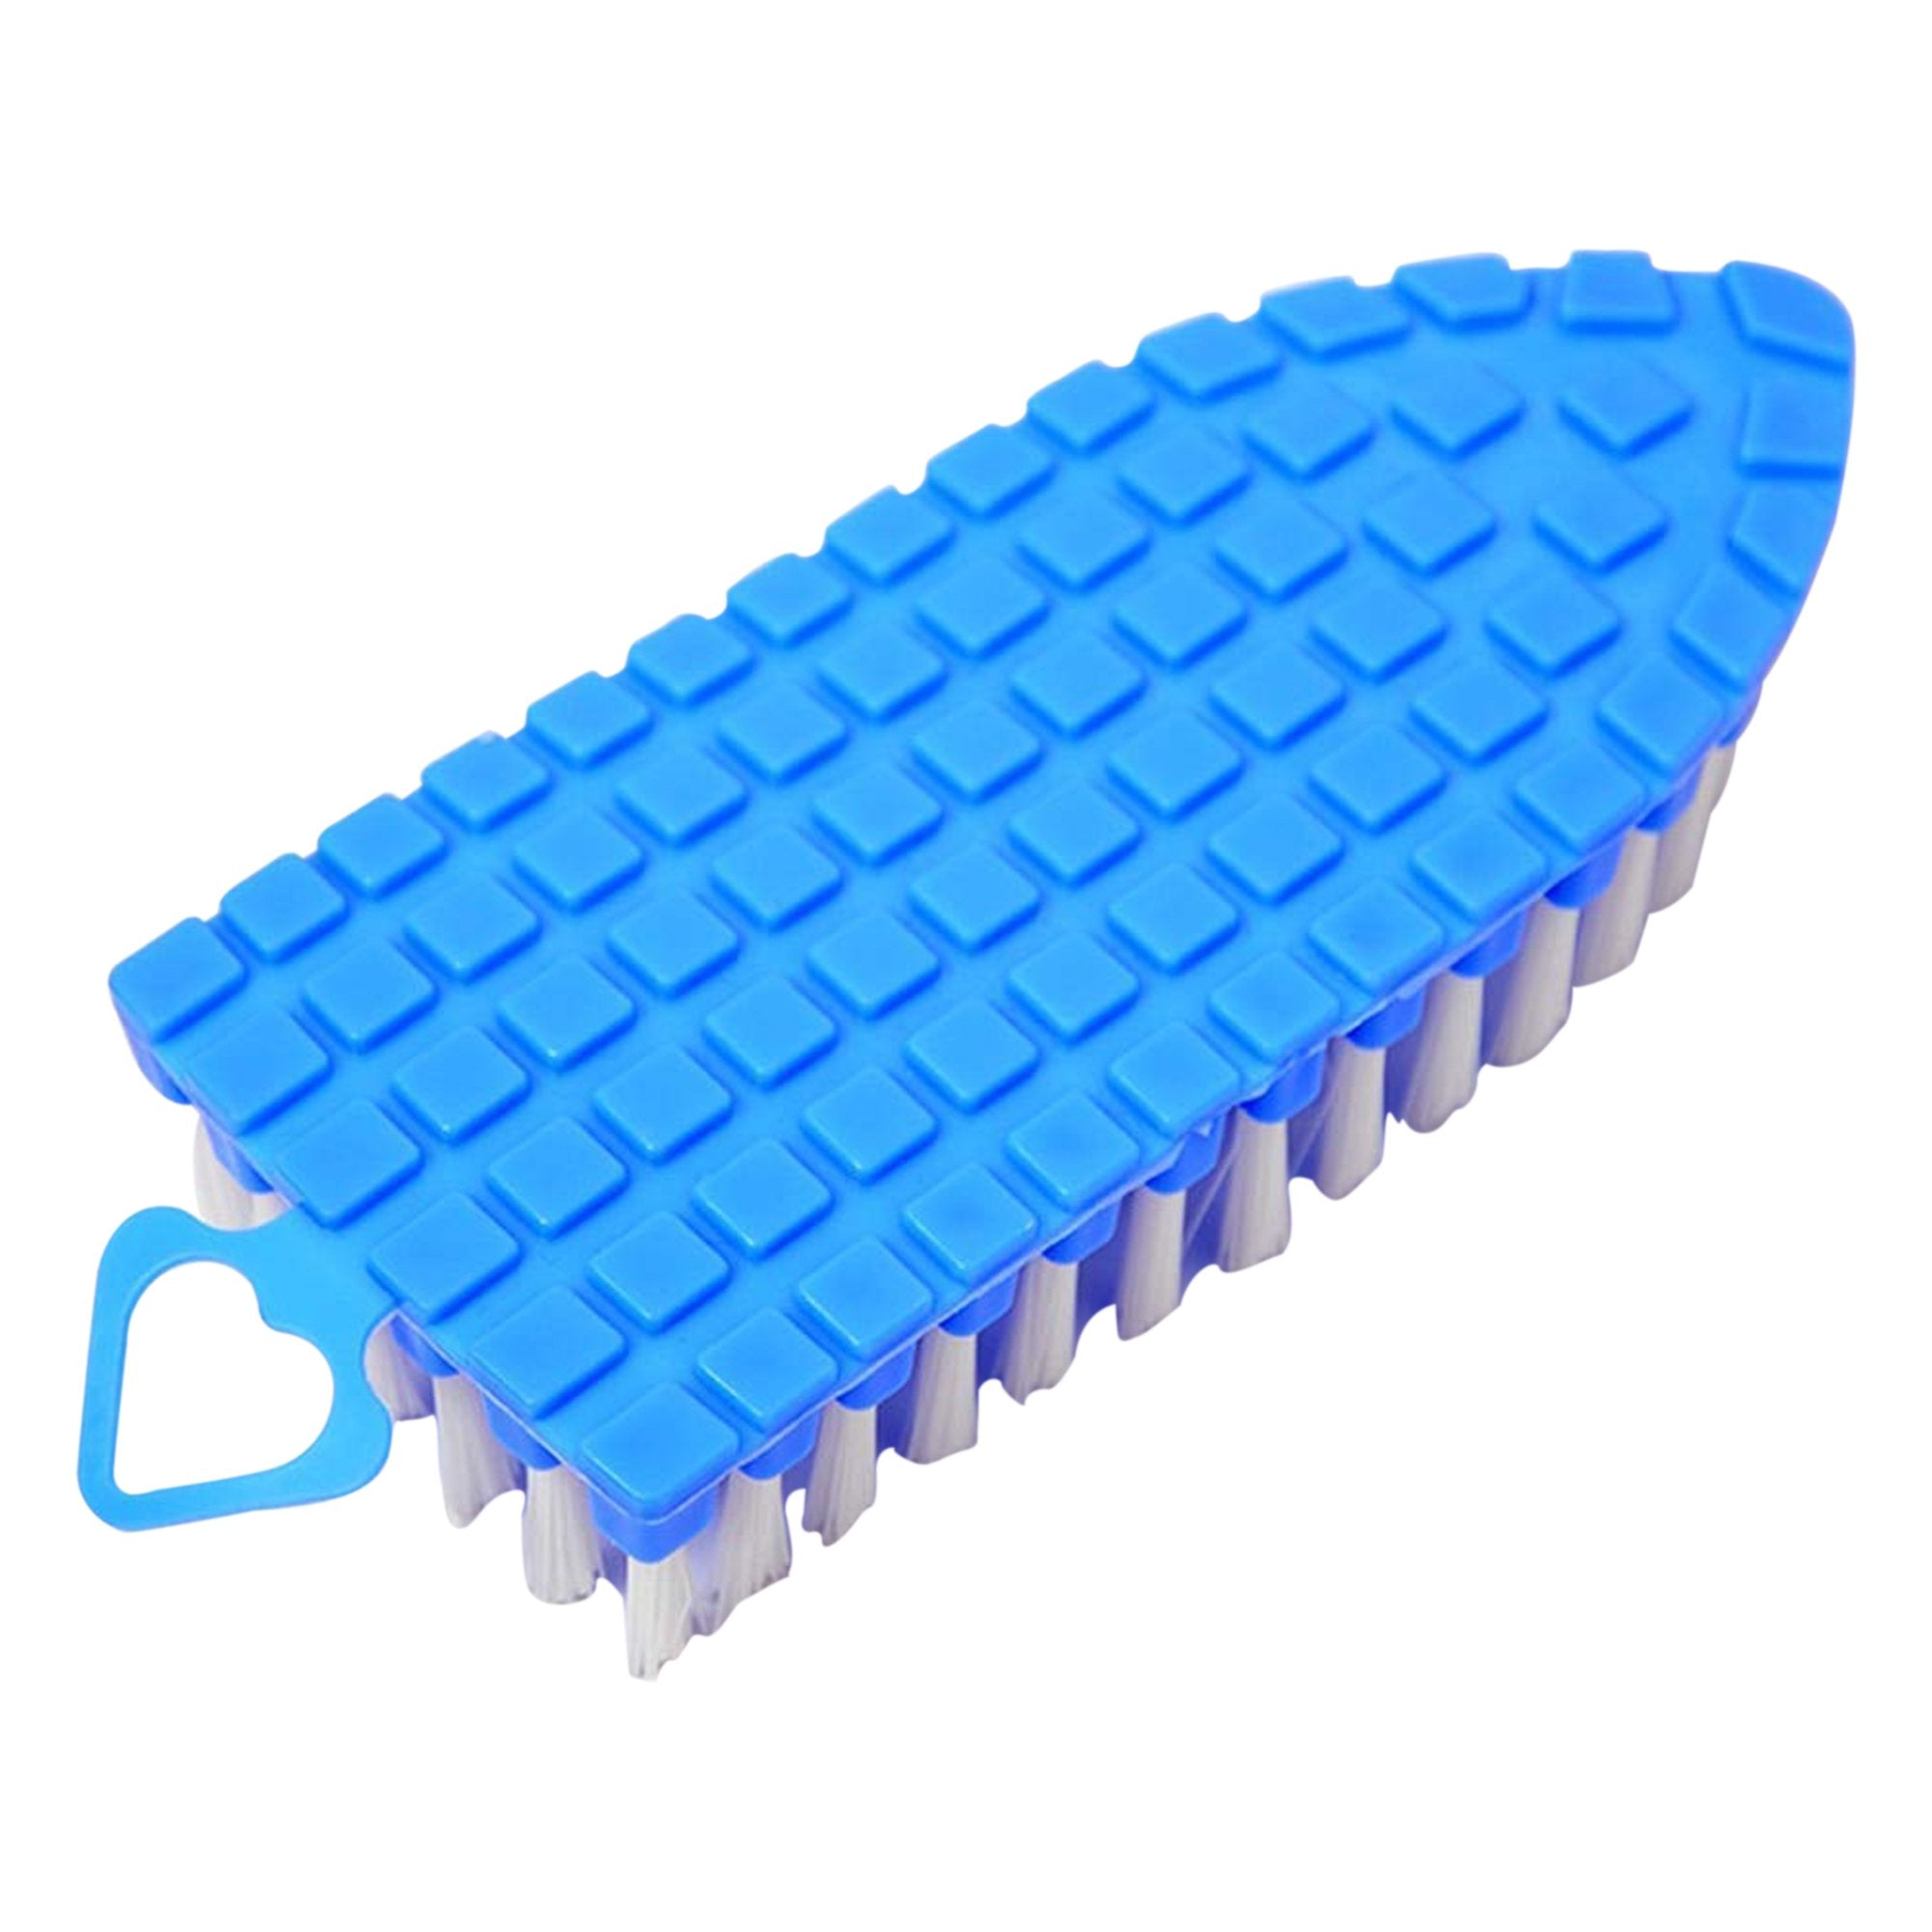 1427 Flexible Plastic Cleaning Brush for Home, Kitchen and Bathroom, - SkyShopy